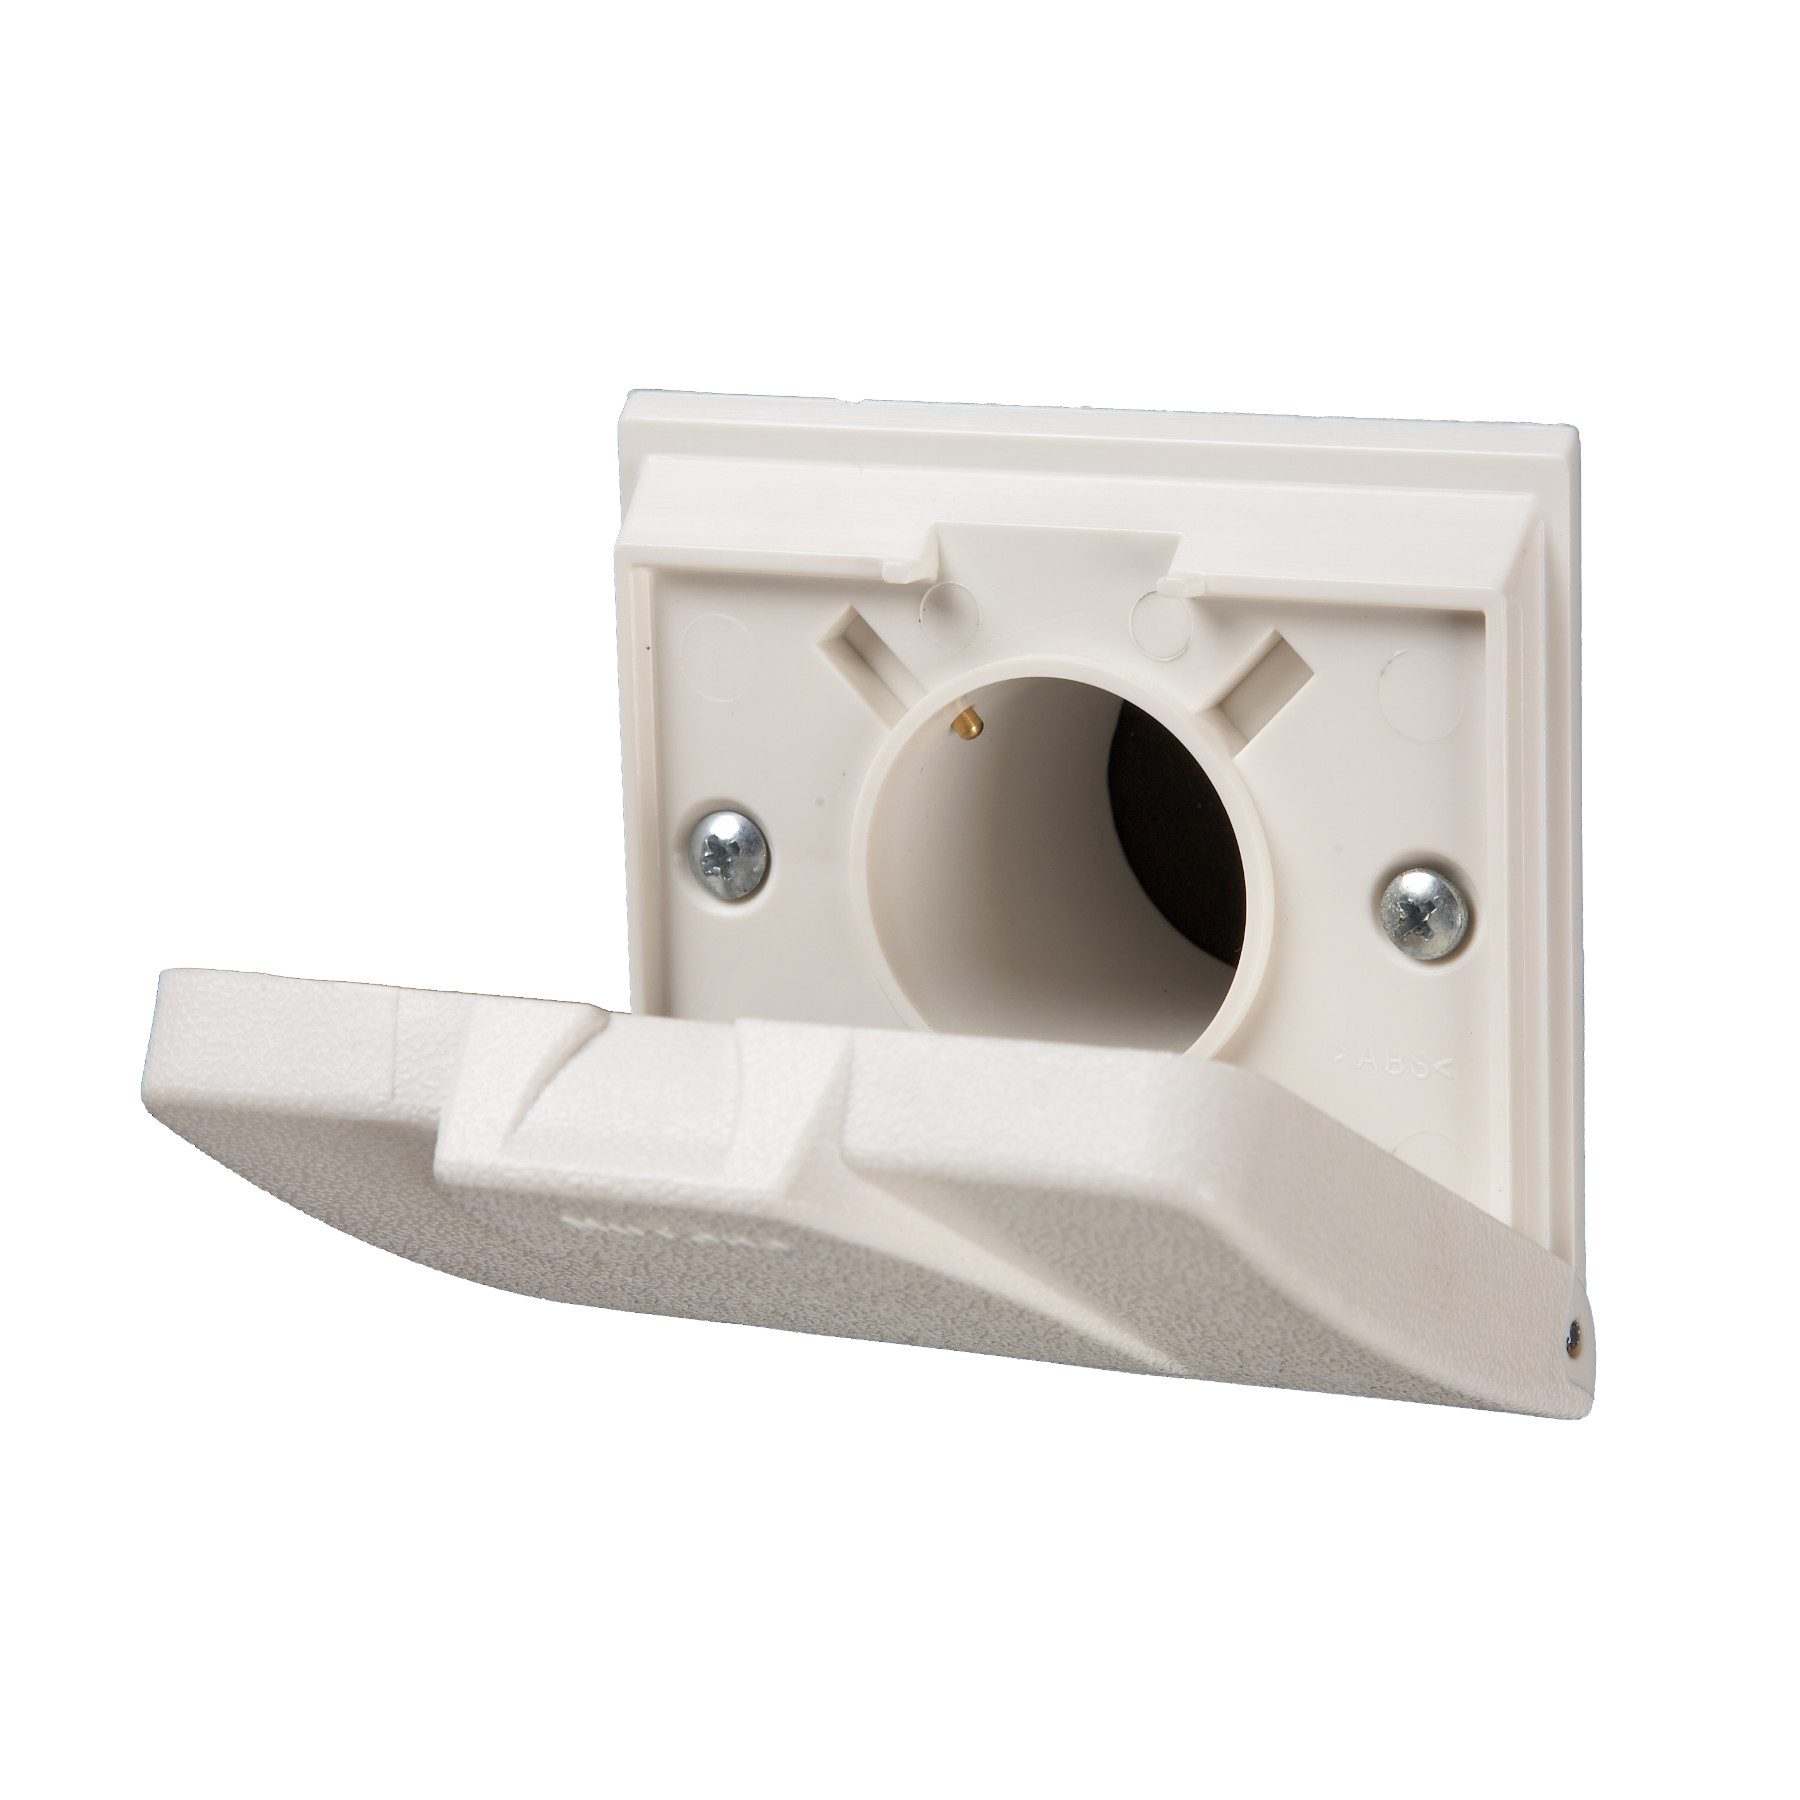 Central Vacuum Wall Inlet for Beam Nutone Cover IVORY Round Door 